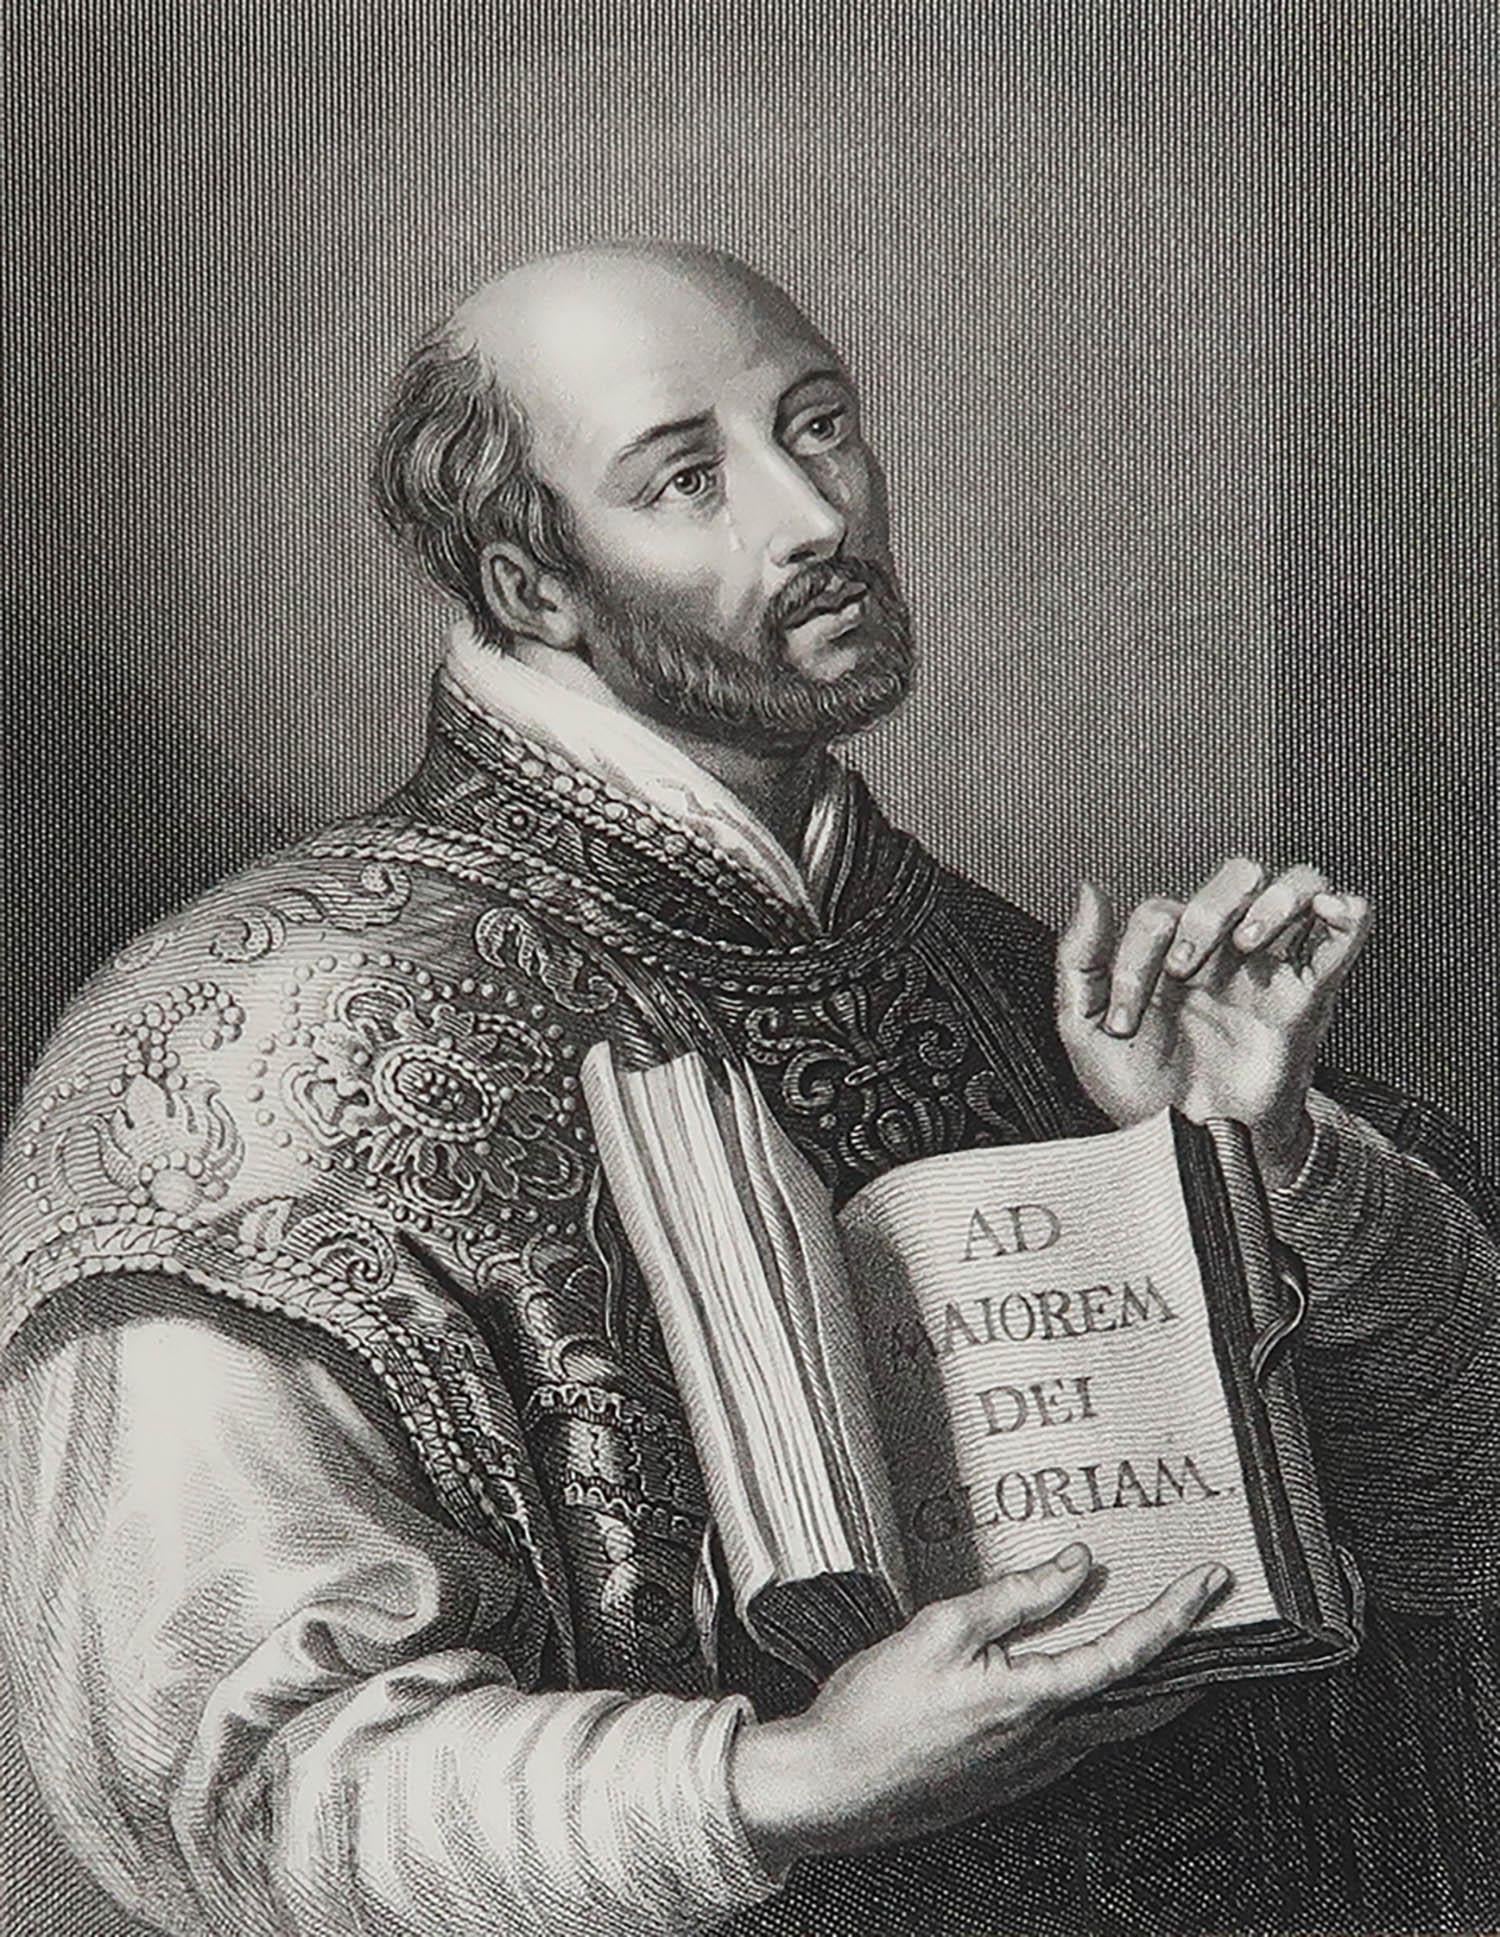 Great image of Ignatius Loyola

Fine steel engraving by Holl

After Rubens

Published by Mackenzie

Unframed.